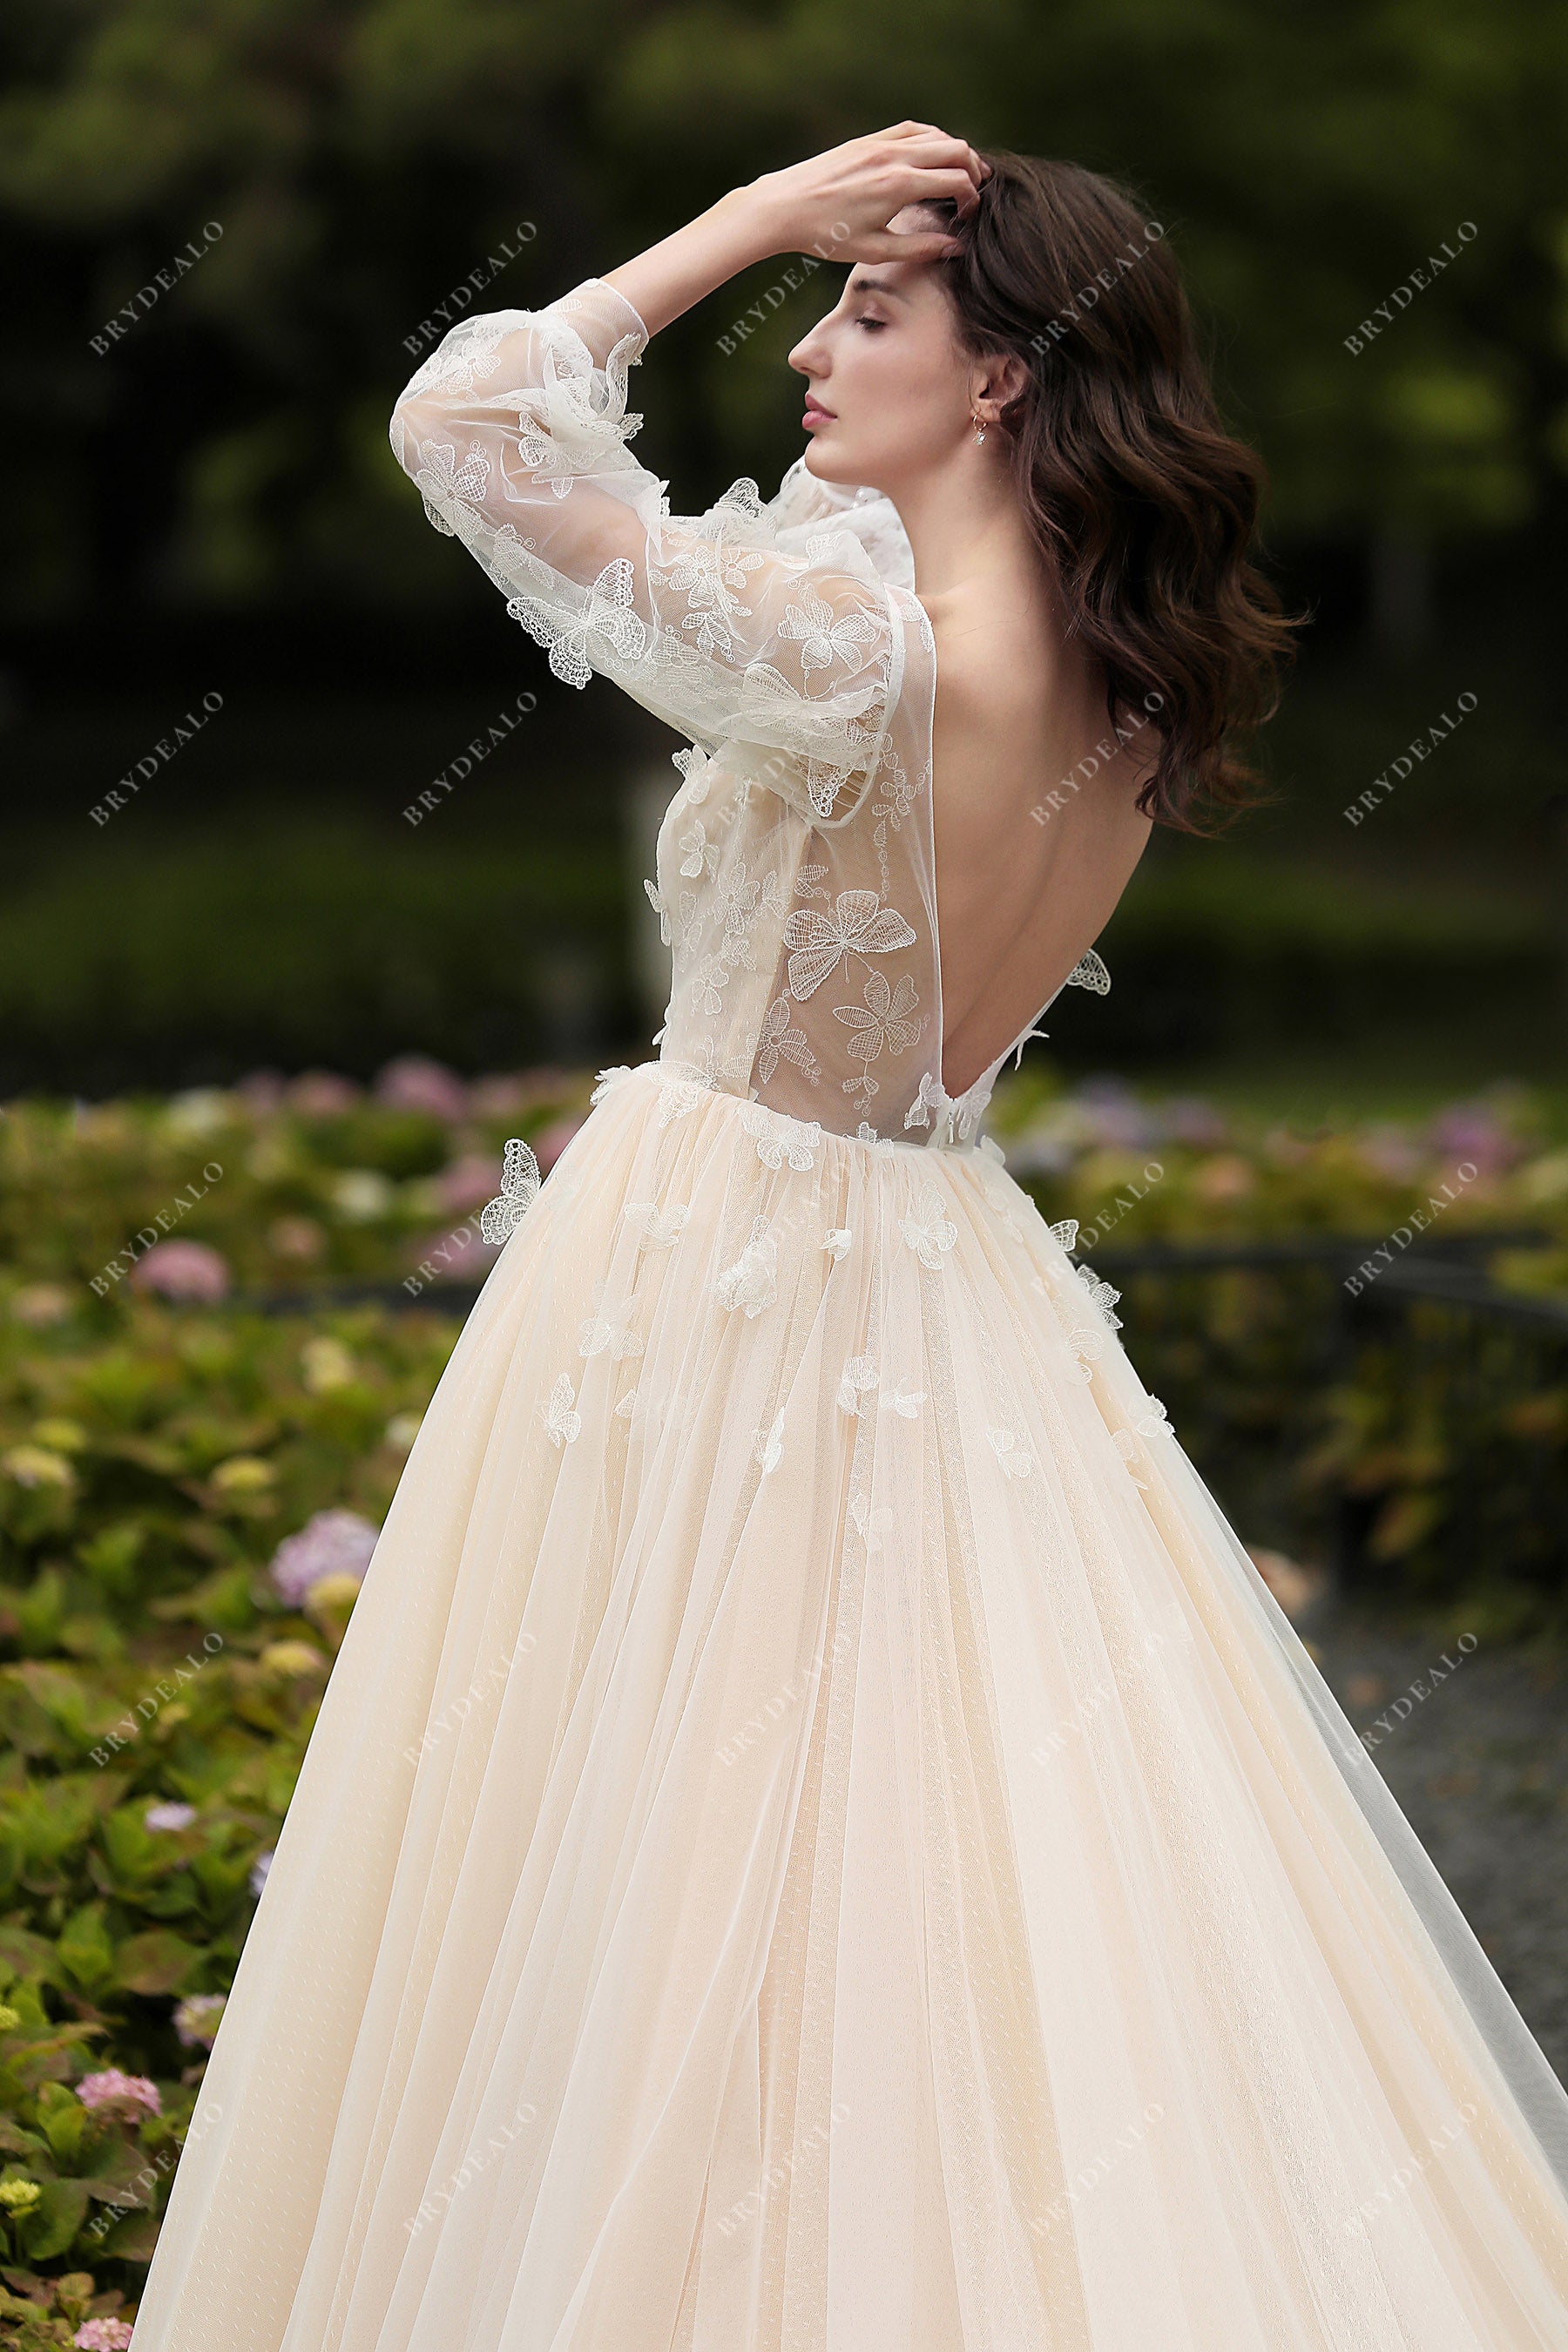 Private Label Colored Butterfly Cinderella Wedding Gown